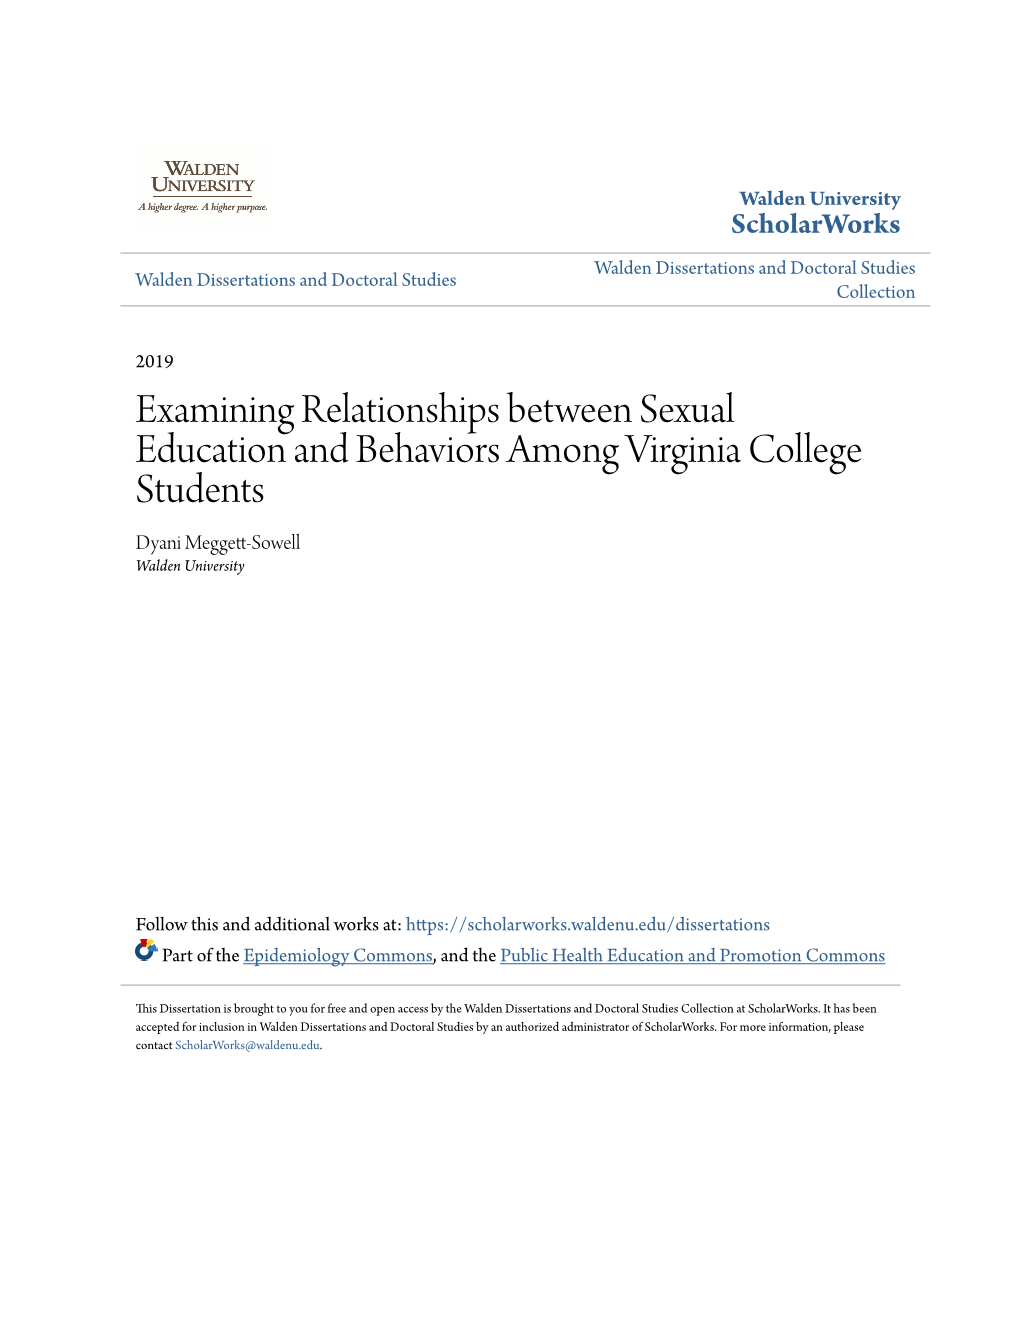 Examining Relationships Between Sexual Education and Behaviors Among Virginia College Students Dyani Meggett-Sowell Walden University